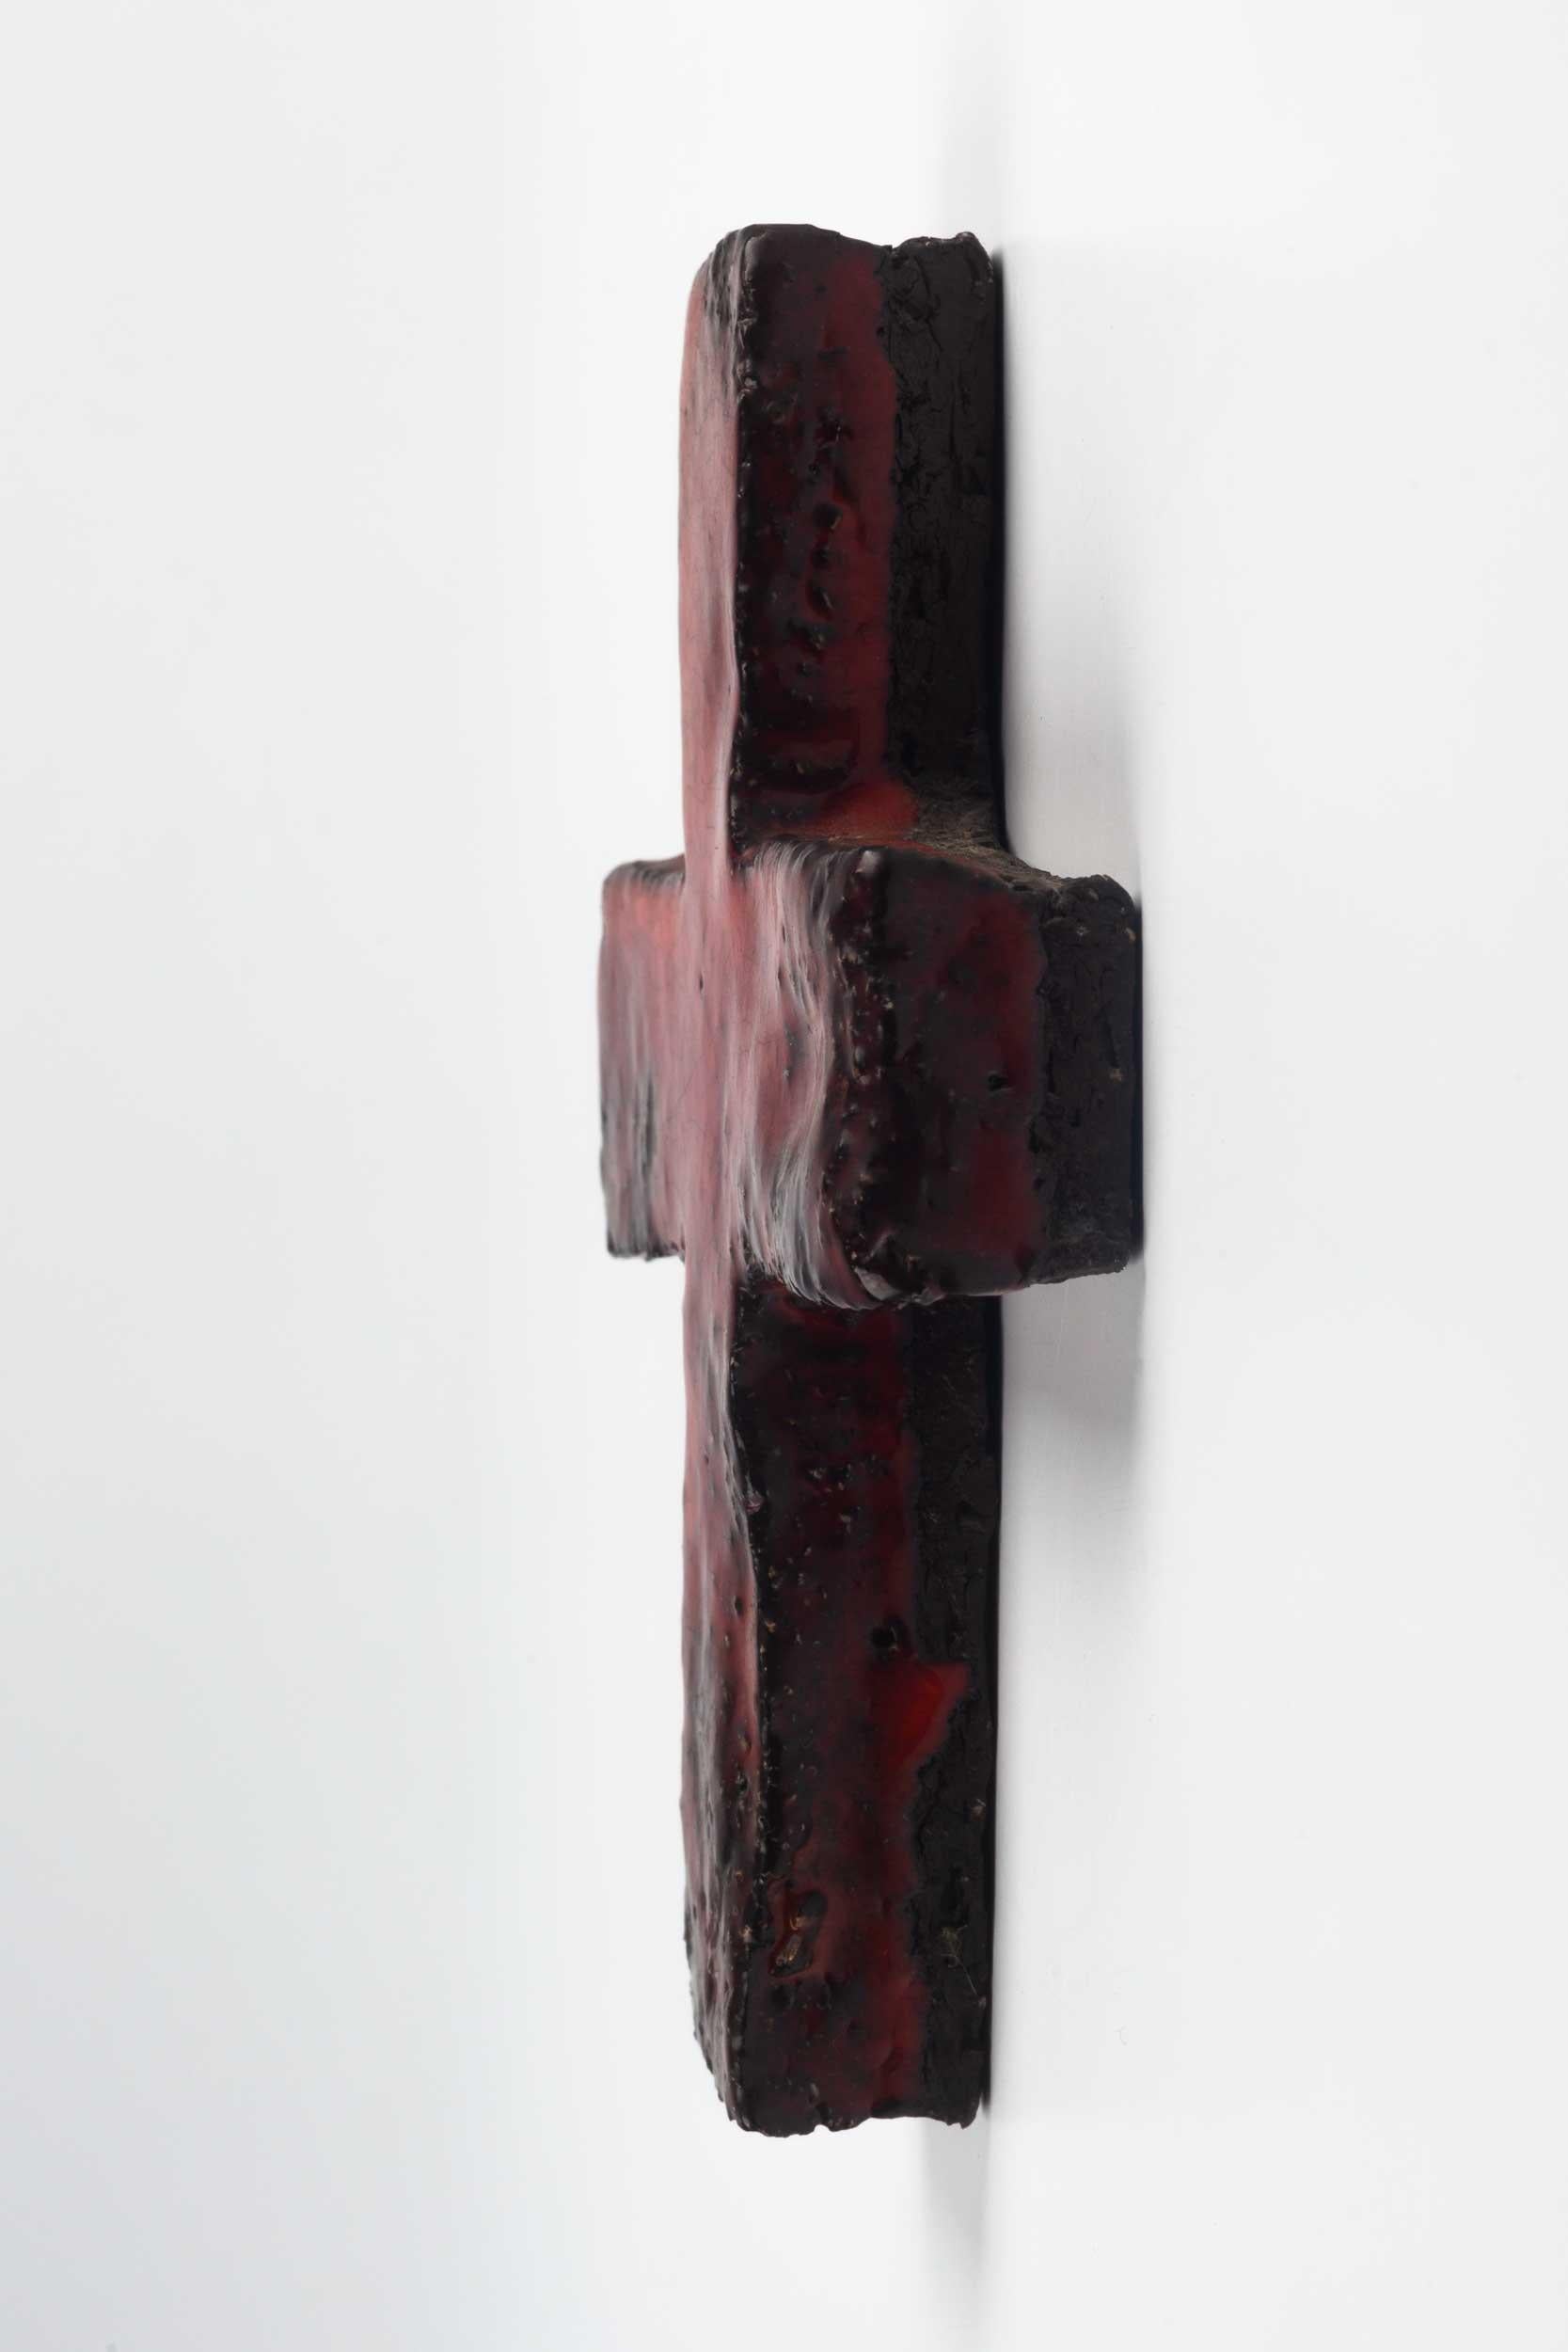 Clay Midcentury European Wall Cross, Textured Ceramic, Red, Black, 1970s For Sale